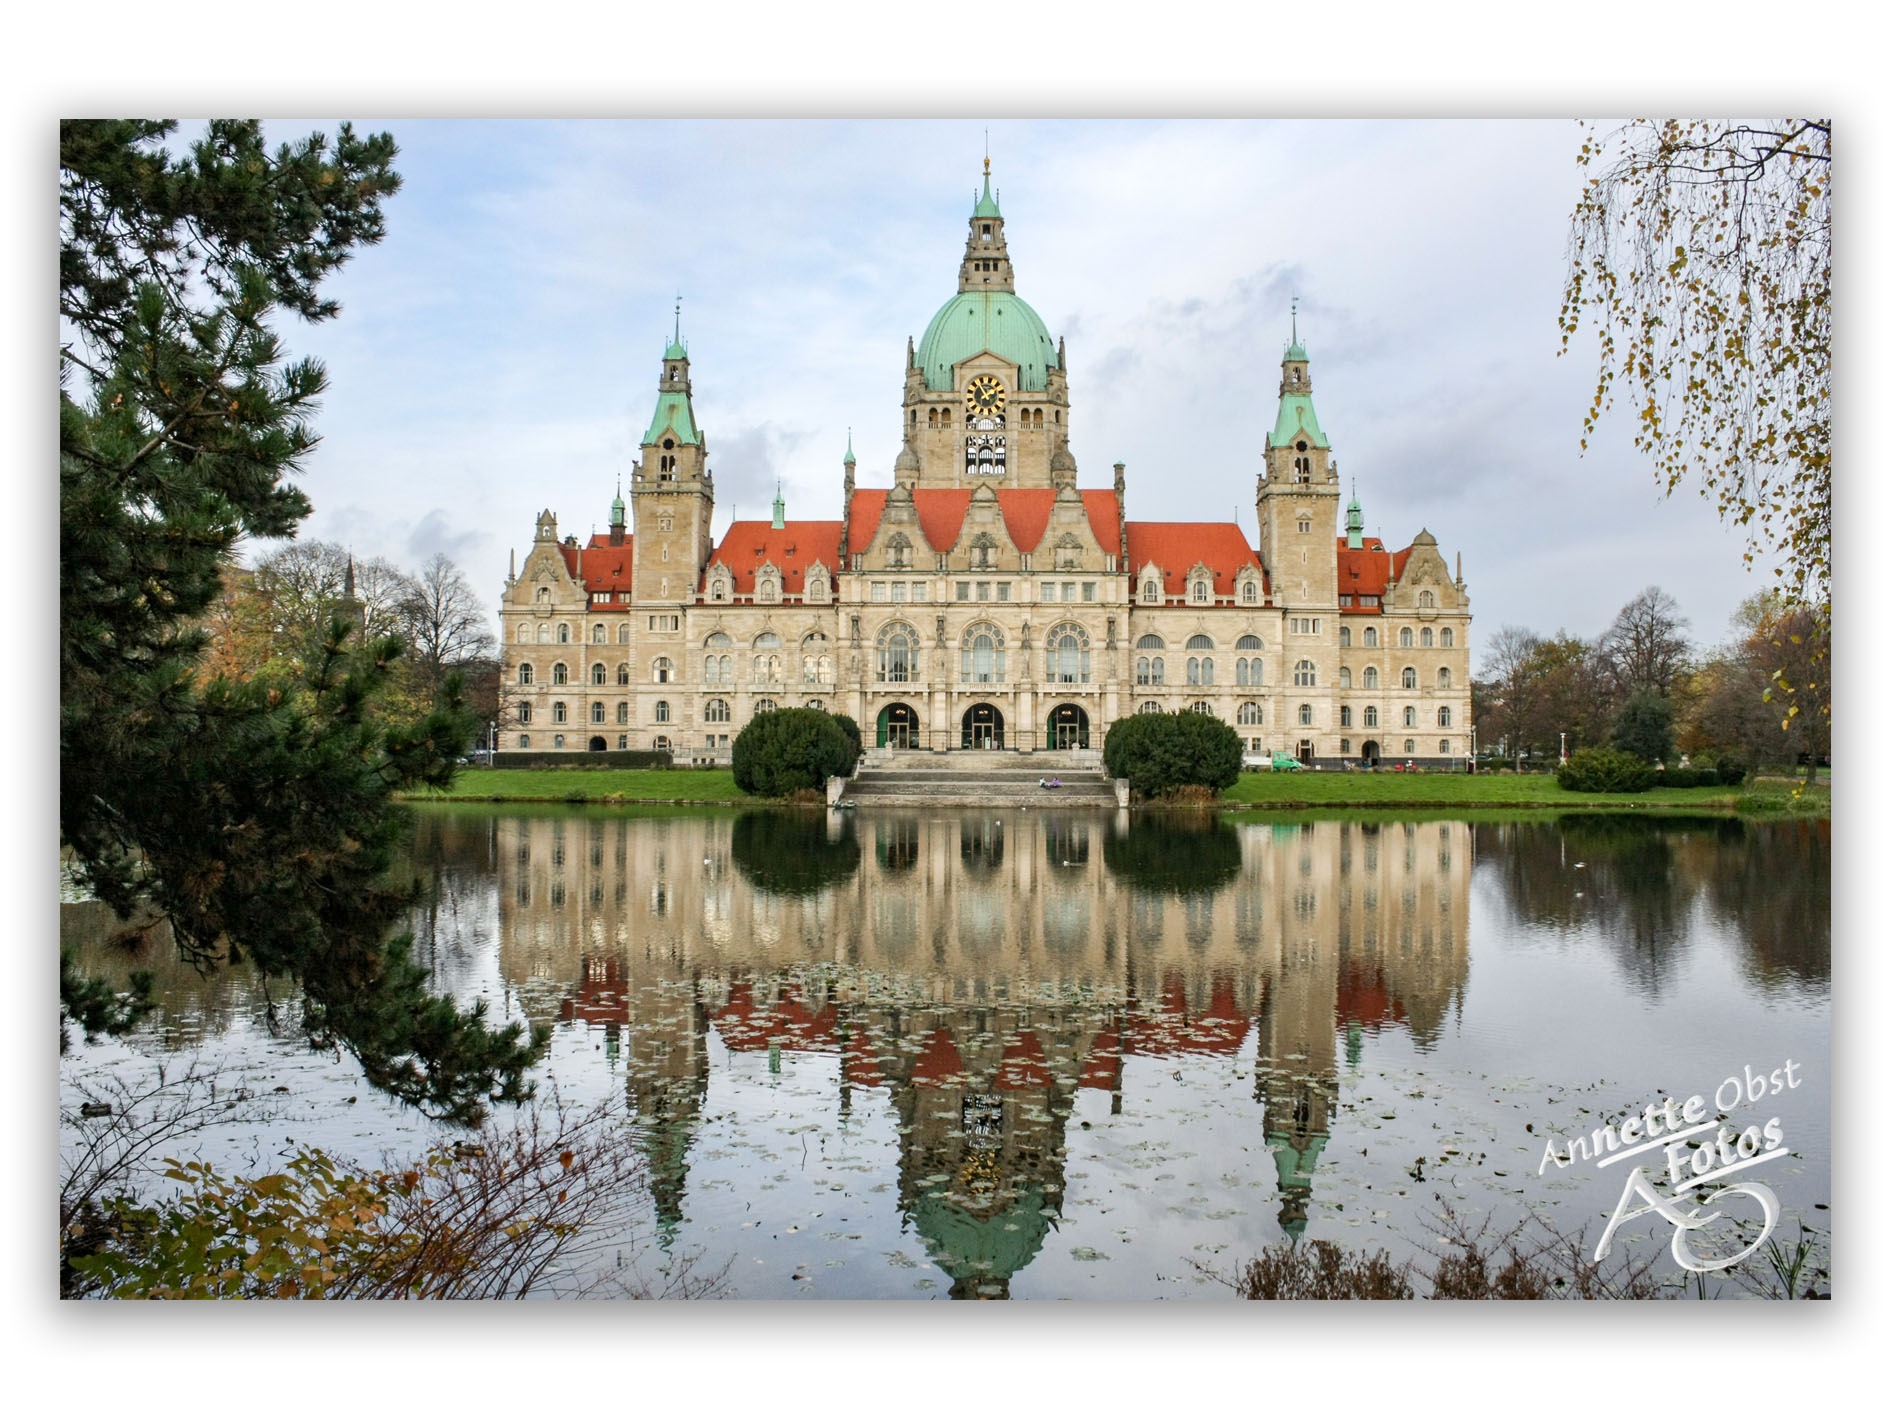 Hannover (Neues Rathaus)